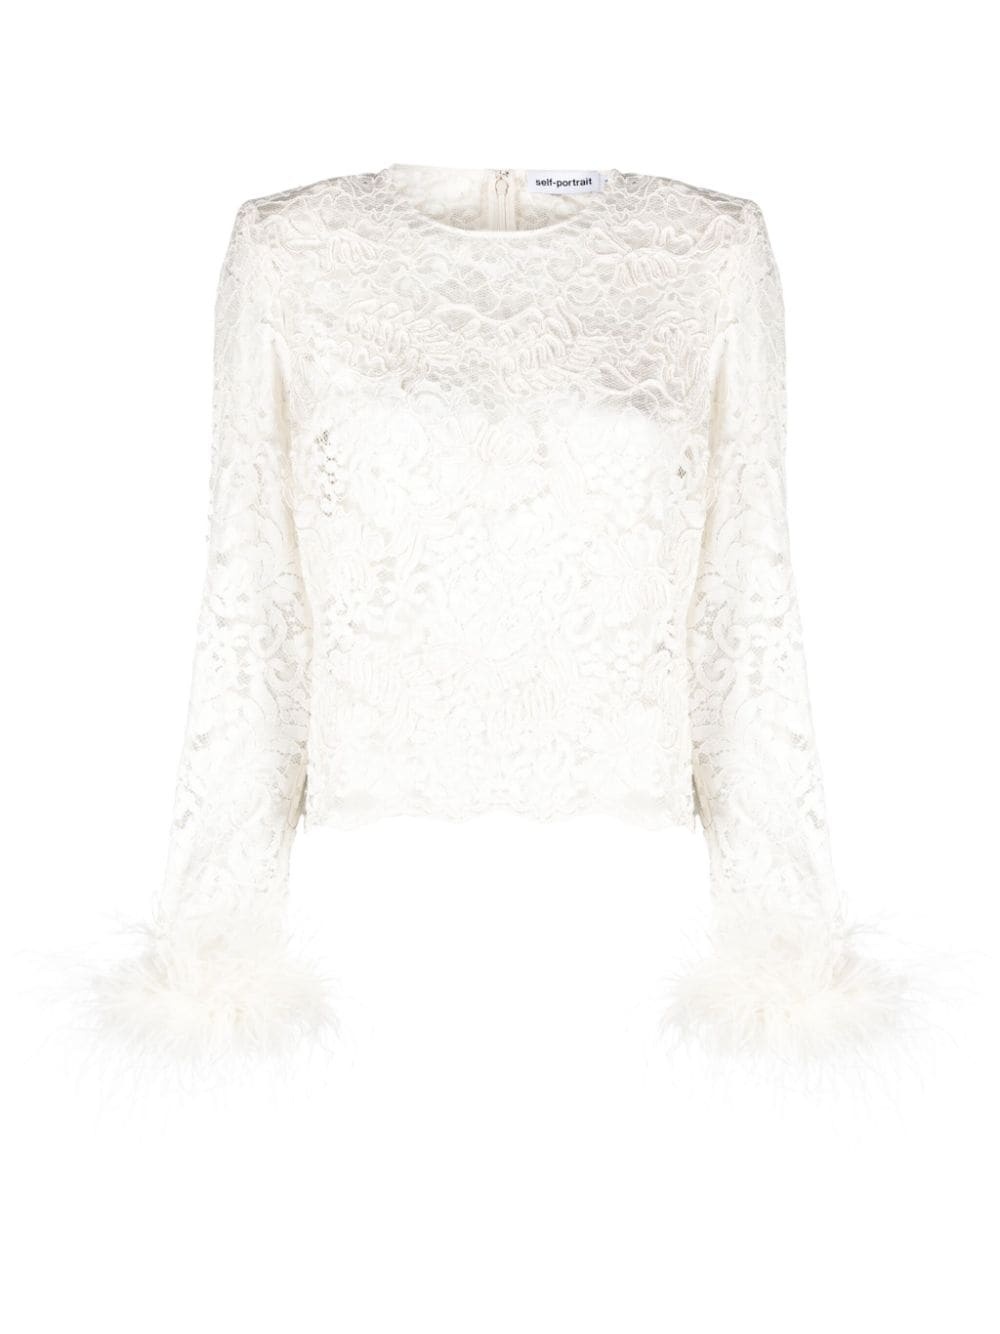 feather-detail cord lace top - 1